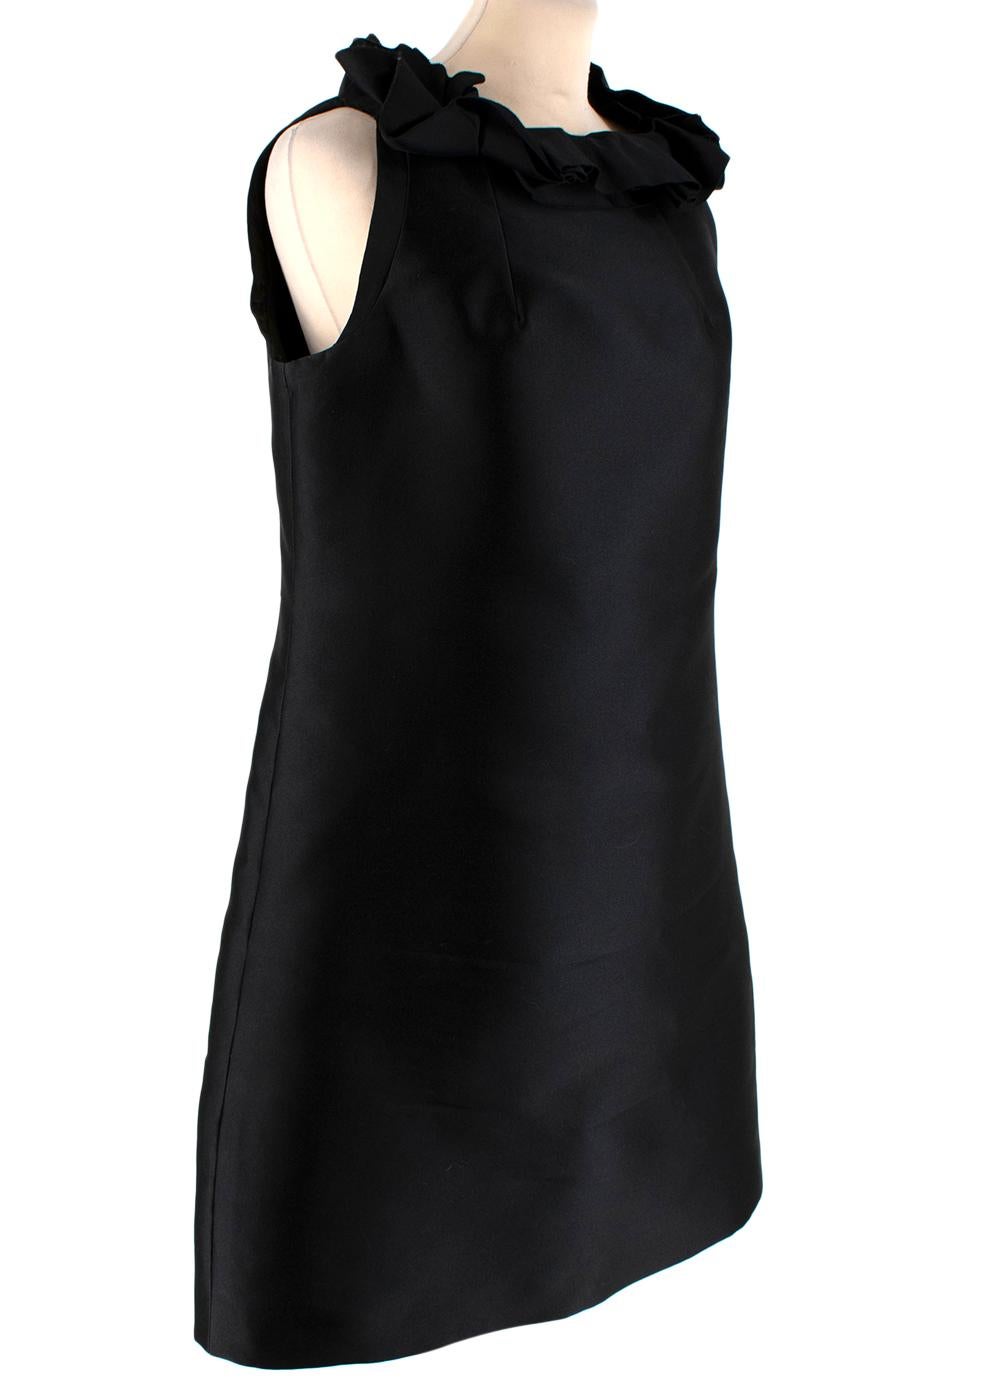 Lanvin Black Ruffled Cocktail Dress

- Ruffled by the crew neckline 
- Concealed zip closure at the back
- Fully lined with silk 
- Fitted cut
- Small repair to the lining, unnoticeable when worn

Materials:
70% Polyester
30% Polyamide
Lining - 100%